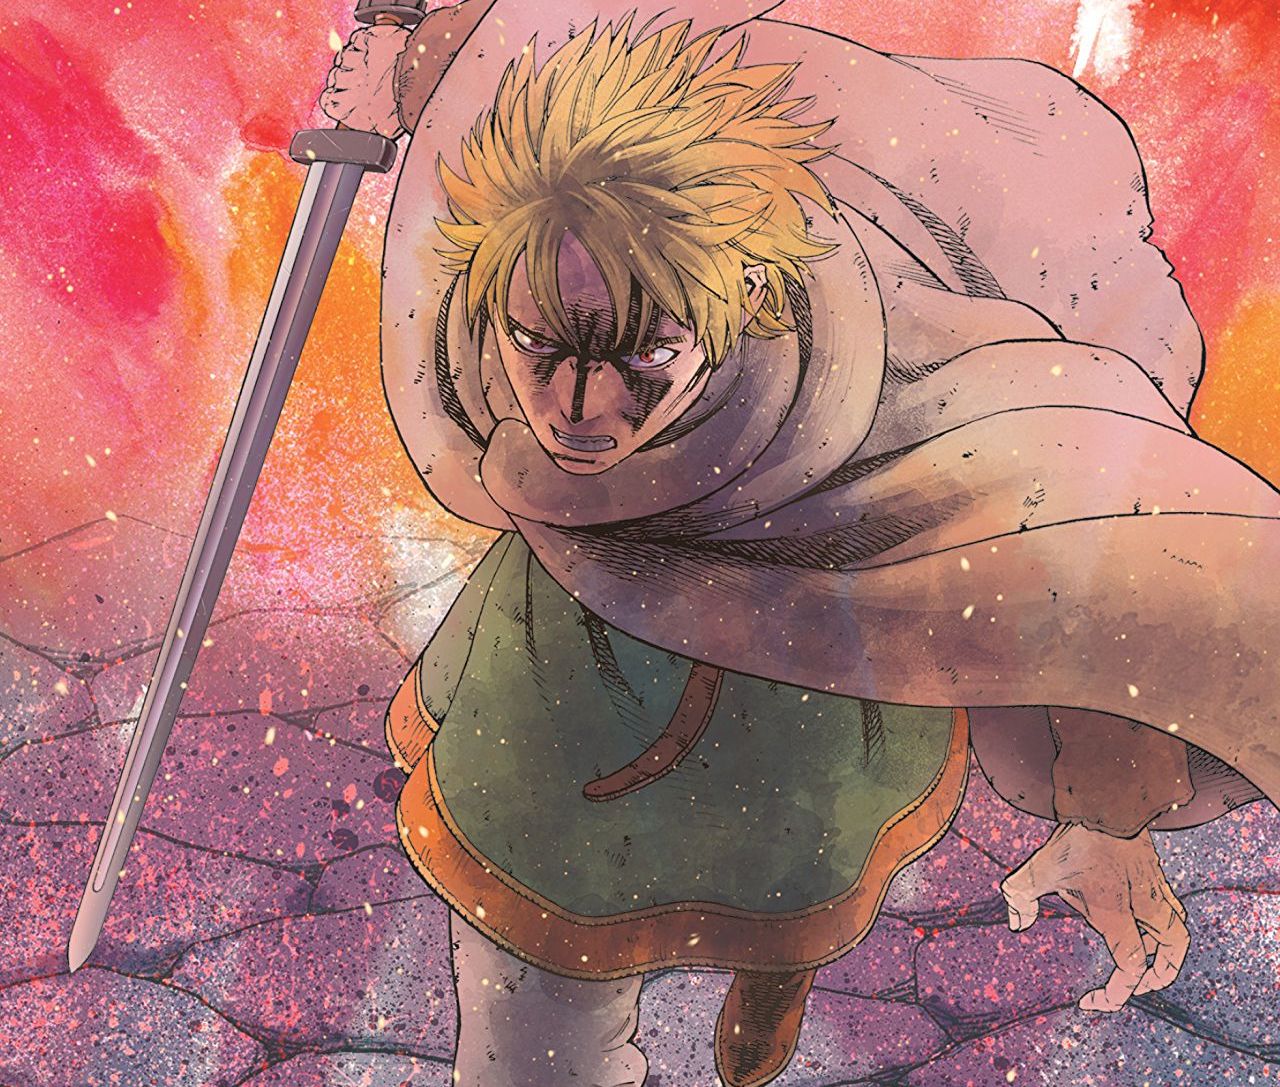 Vinland Saga: Things The Anime Changes From The Manga